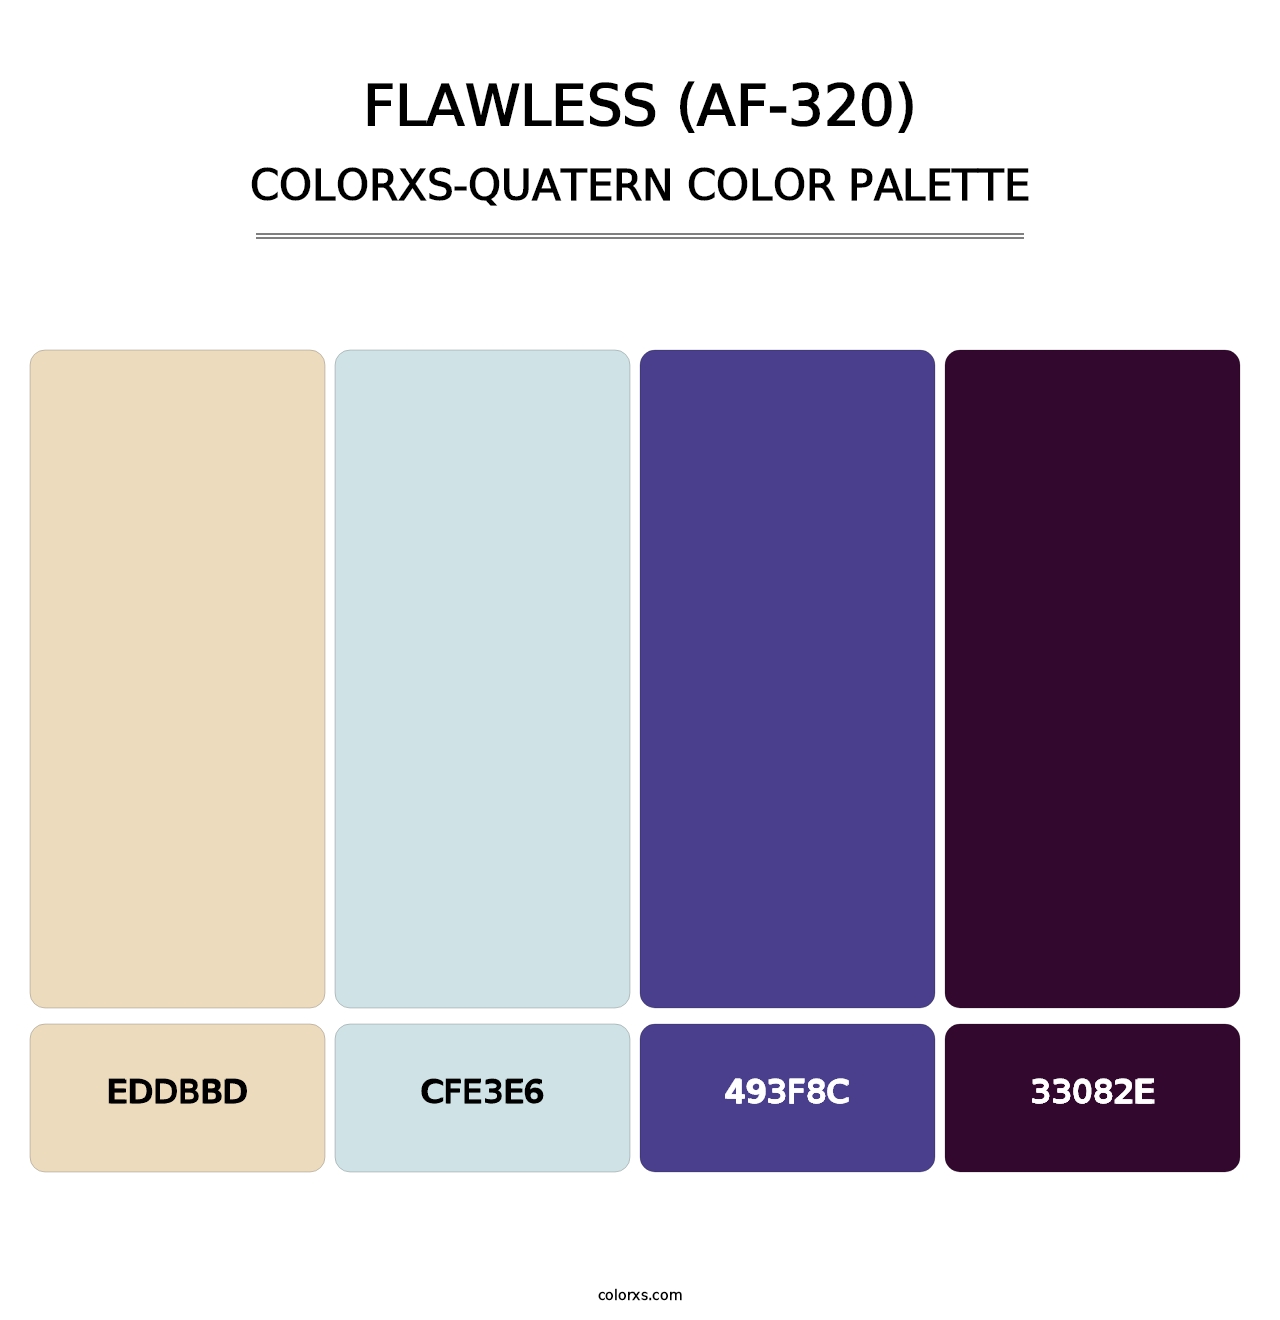 Flawless (AF-320) - Colorxs Quatern Palette